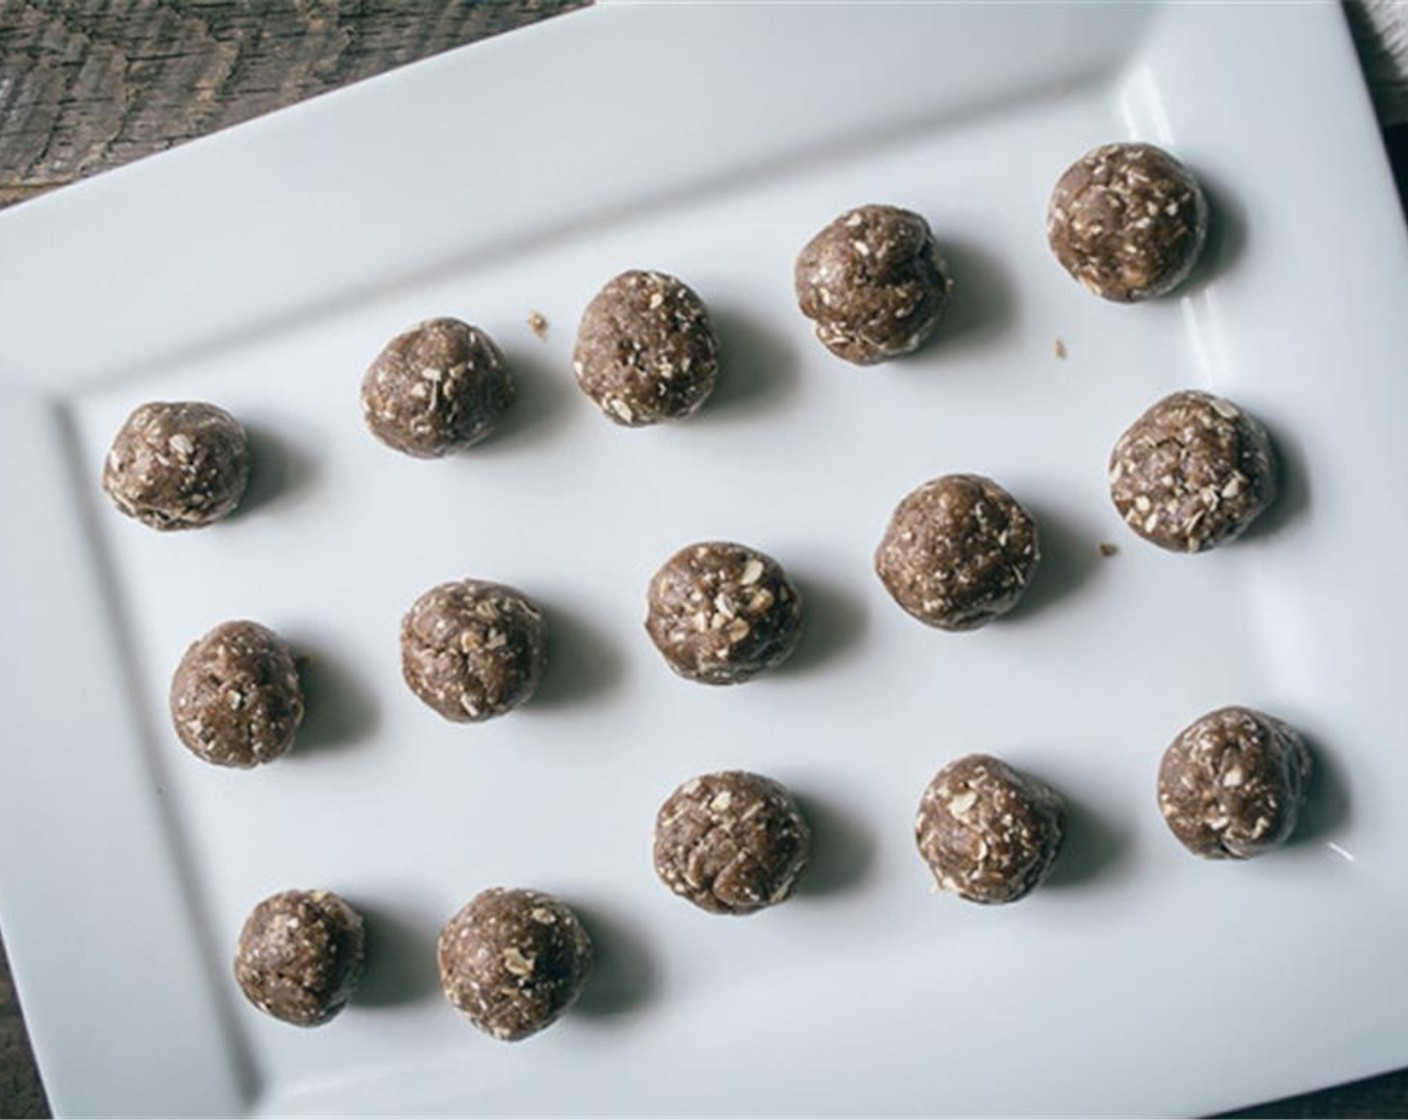 step 2 Pulse 4 to 5 times, then hold and run for 15 to 20 seconds or until all ingredients have blended well to create a cookie dough-like texture. Line baking sheet with wax paper, roll the cookie dough into 16 small balls, approximately 1-inch in diameter.